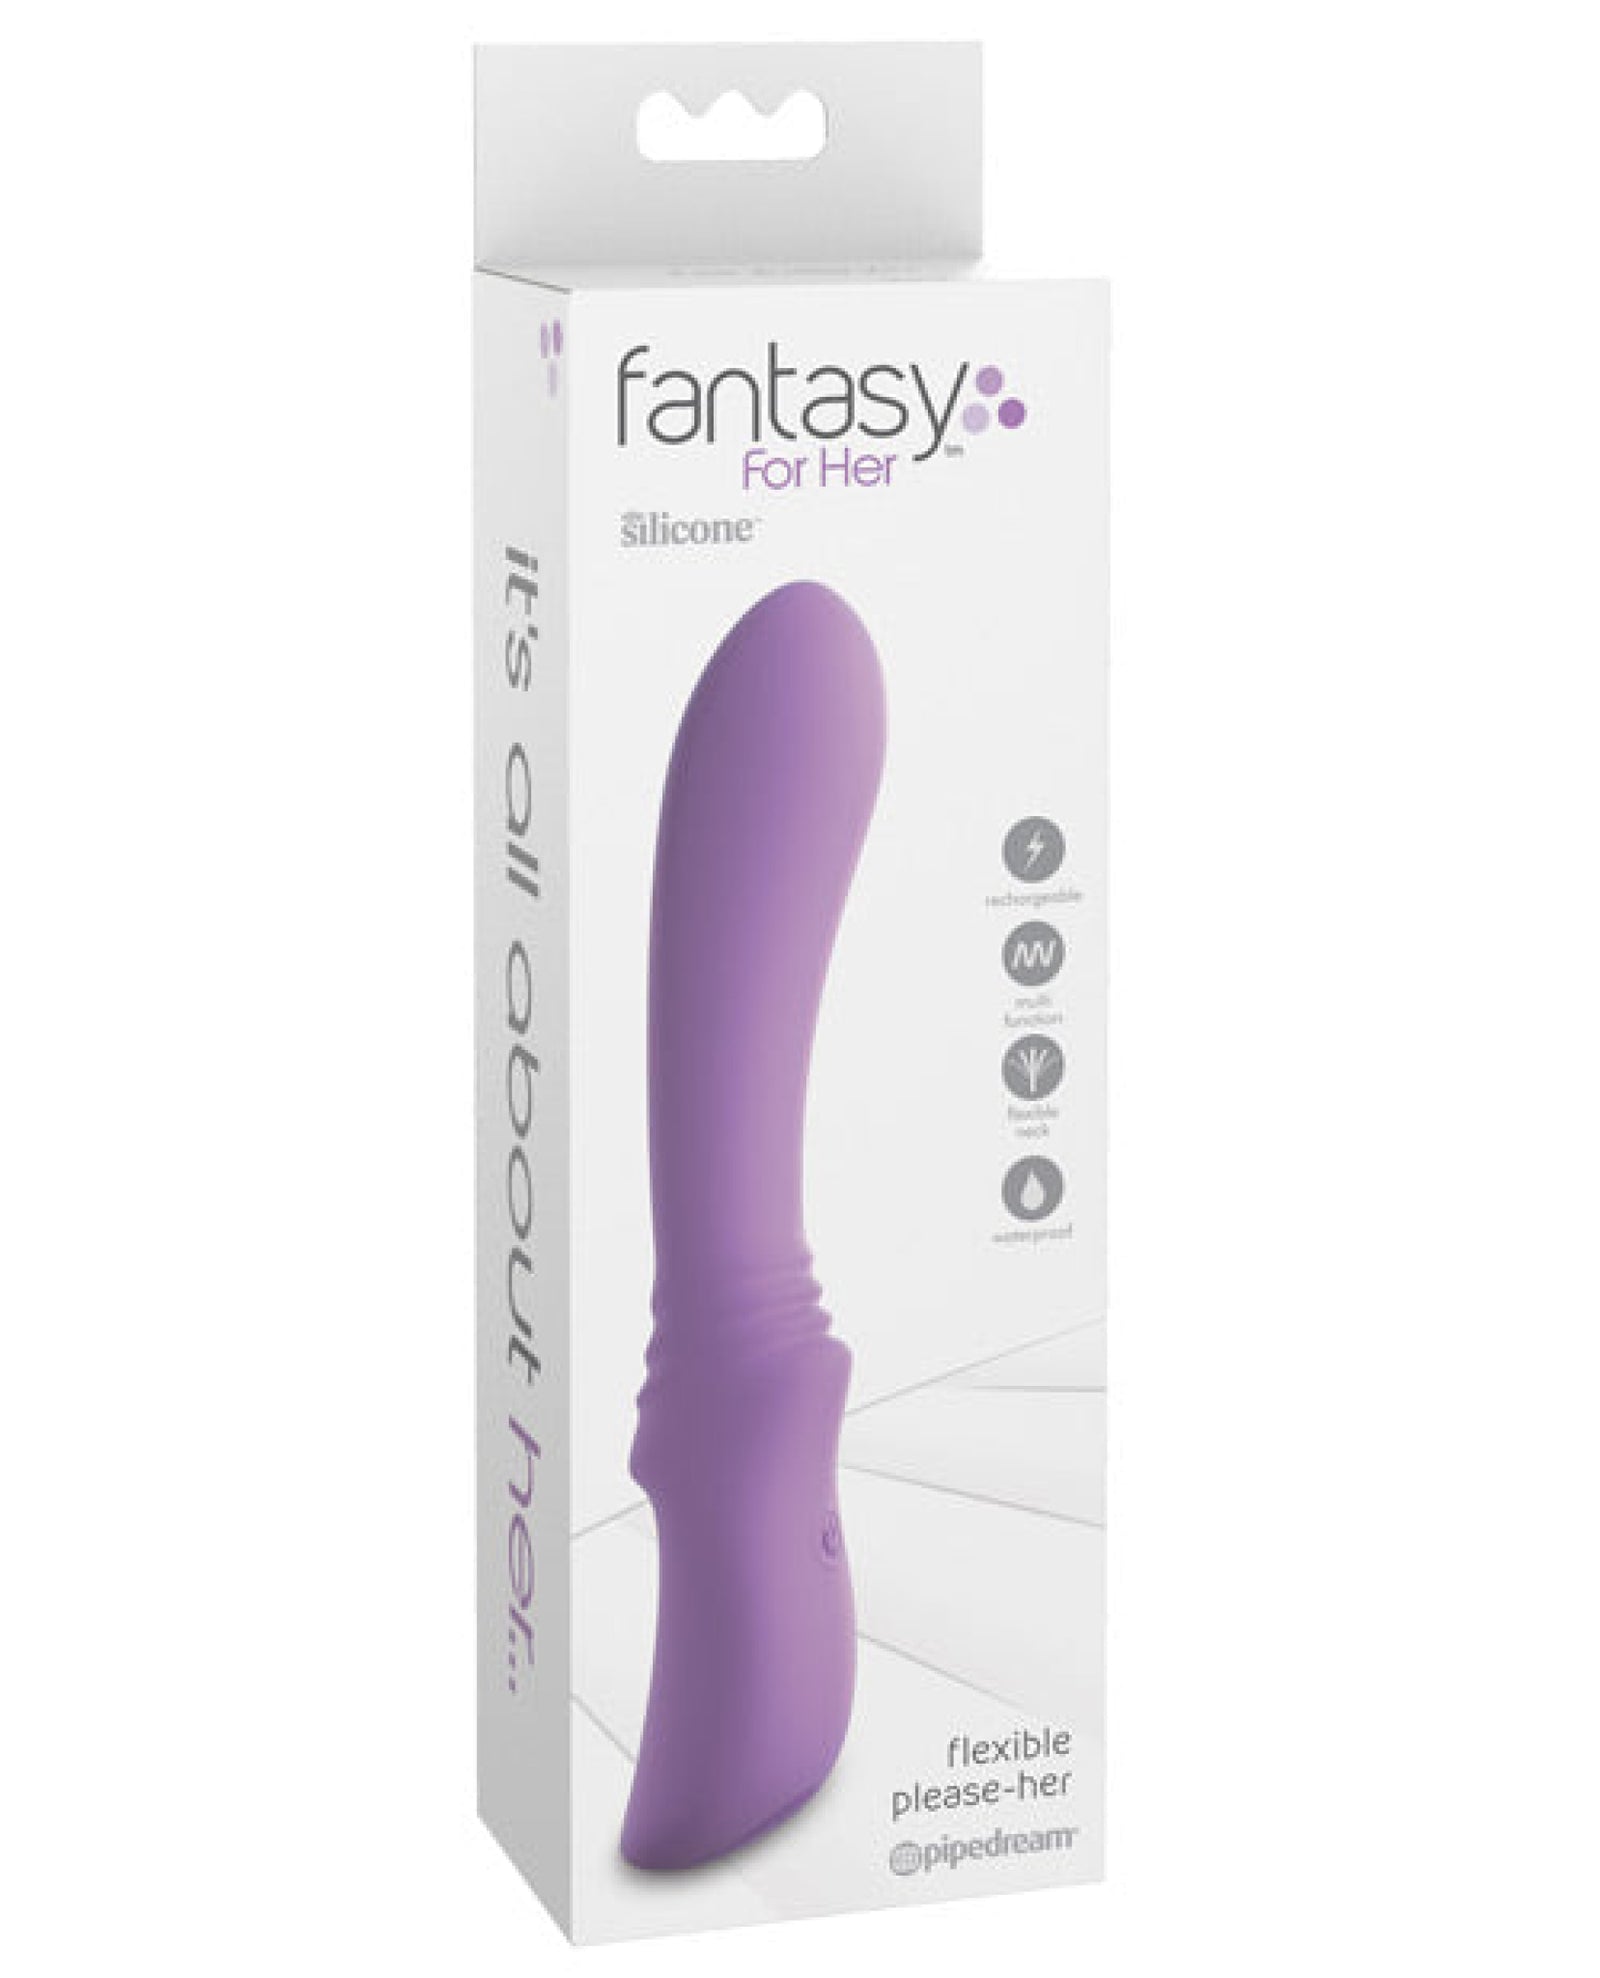 Fantasy For Her Flexible Please-her Pipedream®